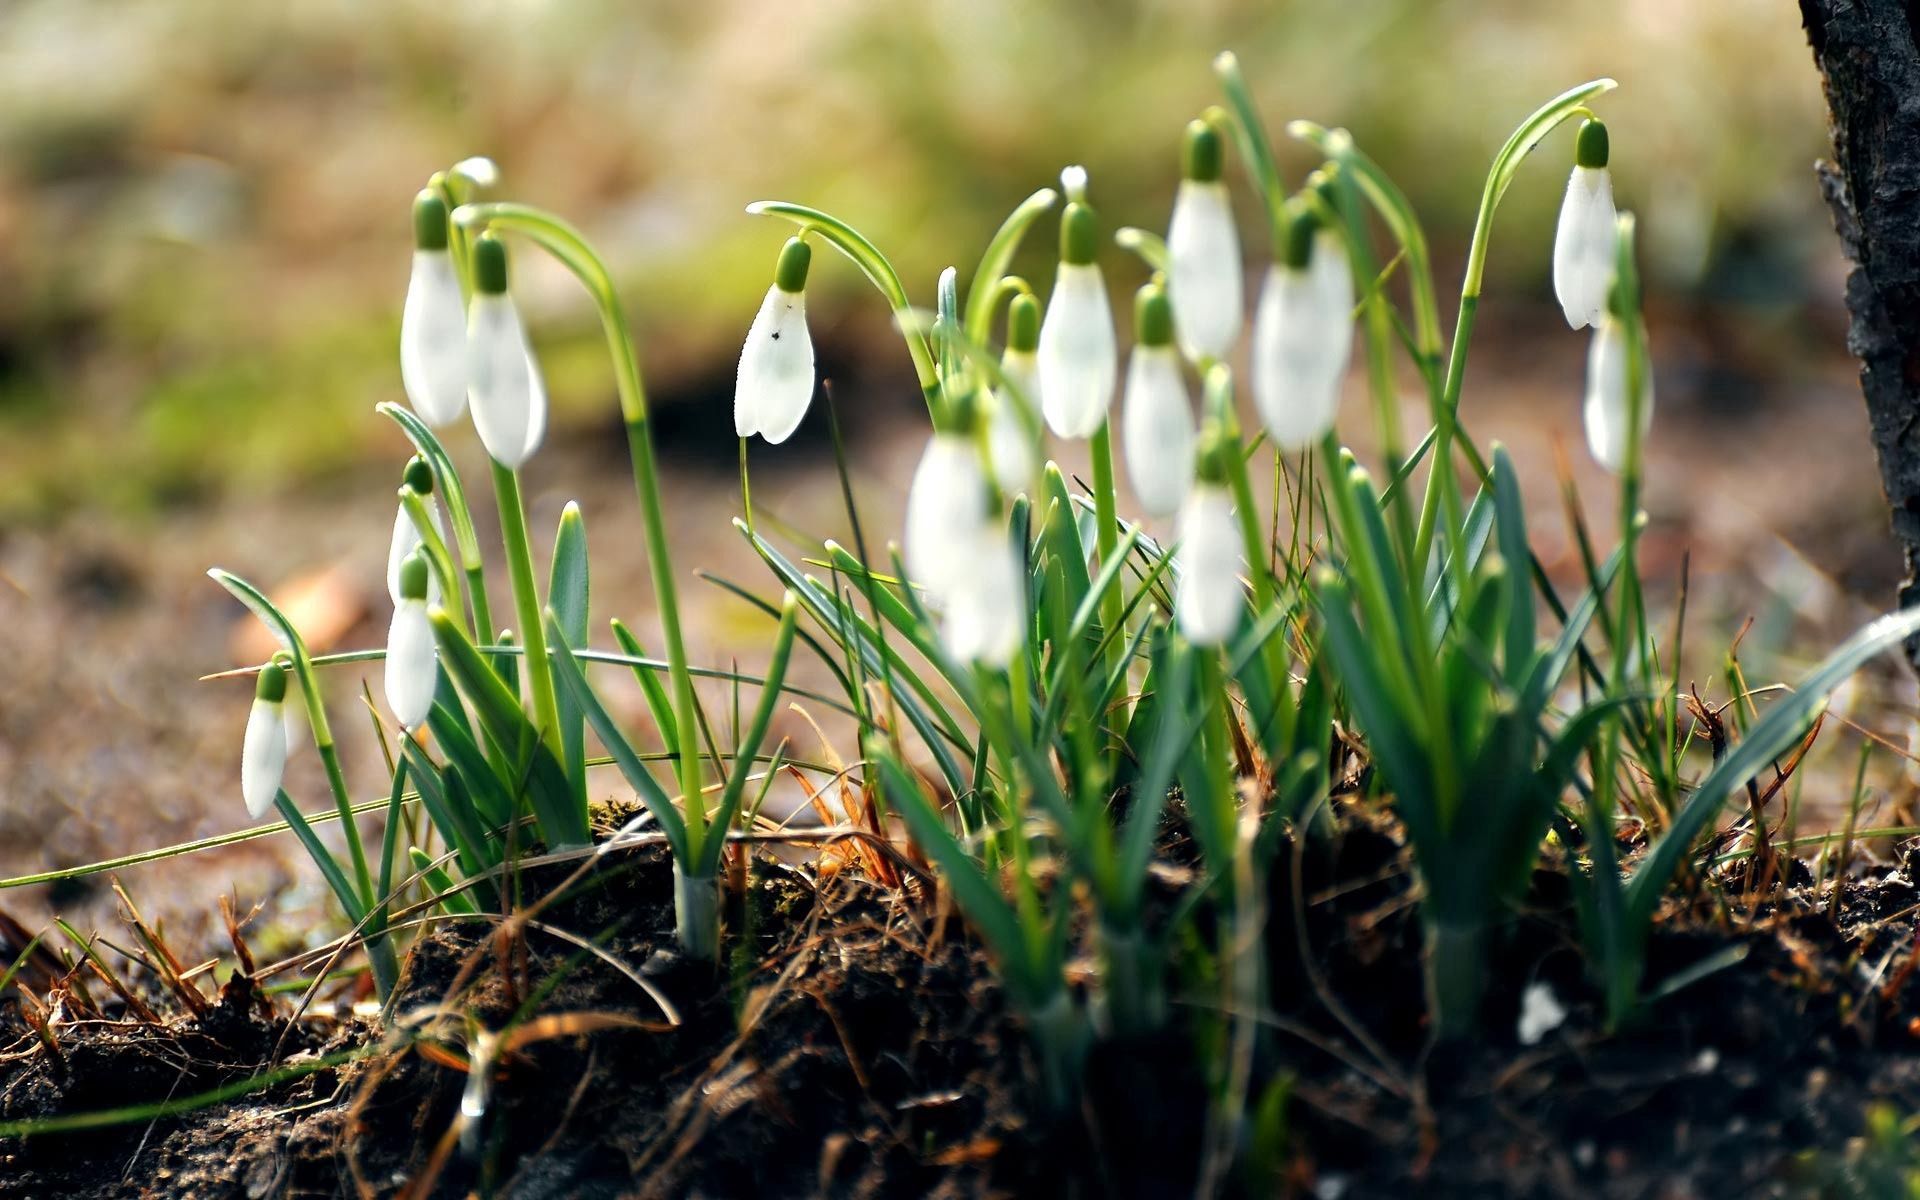 Download wallpaper 1920x1200 snowdrops, flowers, primroses, spring, leaves, earth HD background